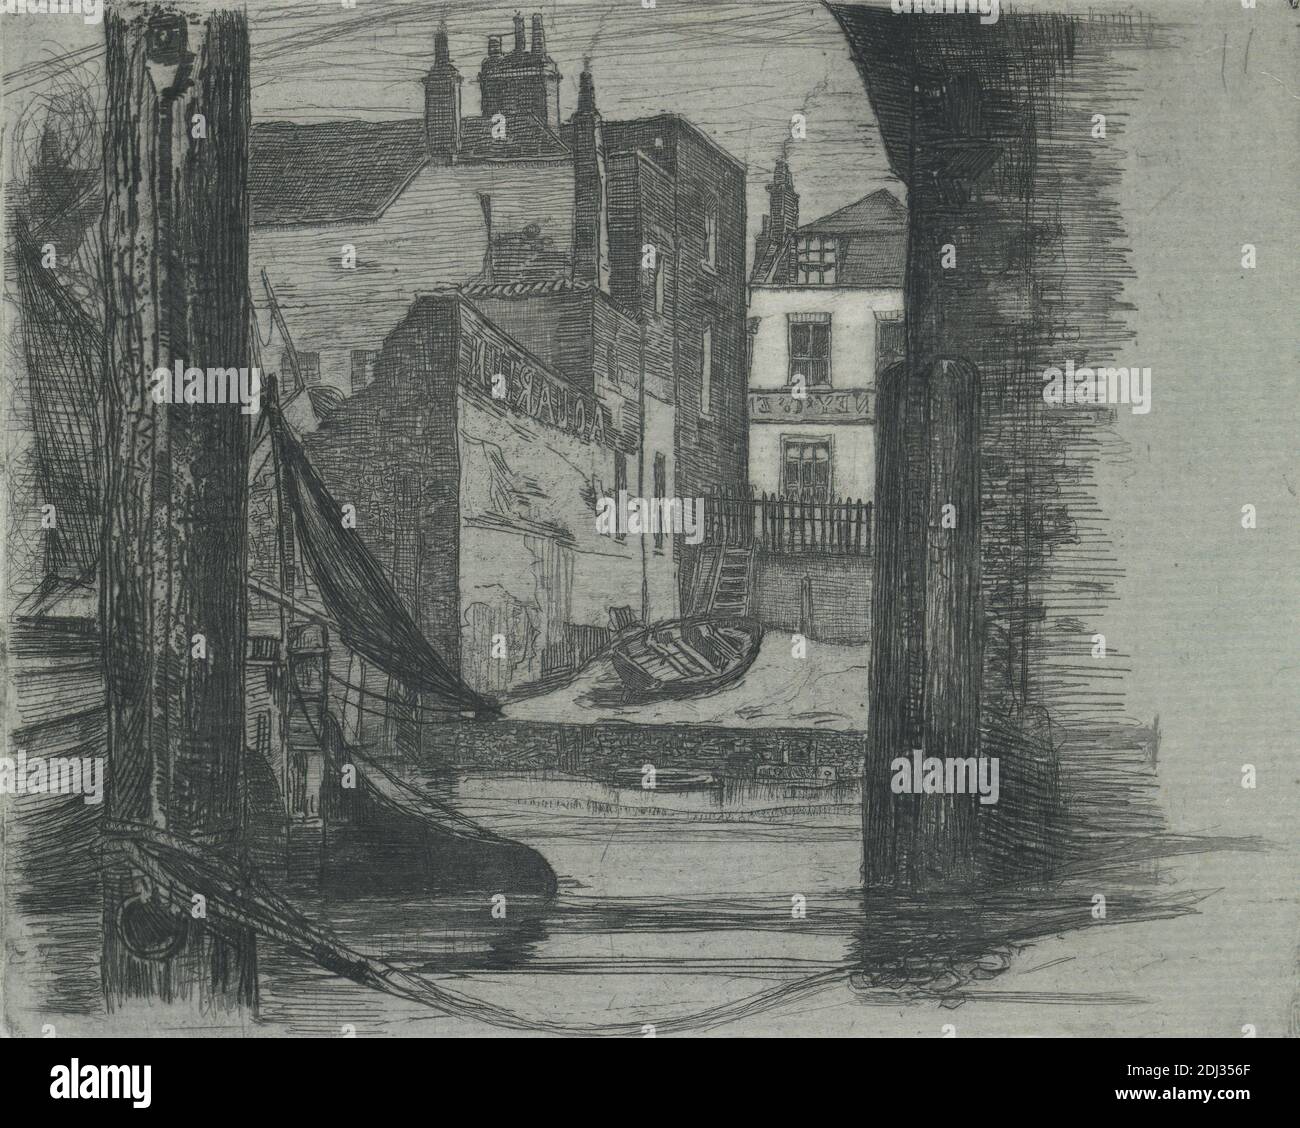 Under Lambeth Bridge, Edgar M. Wilson, 1861–1918, before 1899, Etching on laid paper, Plate: 4 x 5in. (10.2 x 12.7cm) and Sheet: 6 x 5 7/8in. (15.2 x 14.9cm Stock Photo